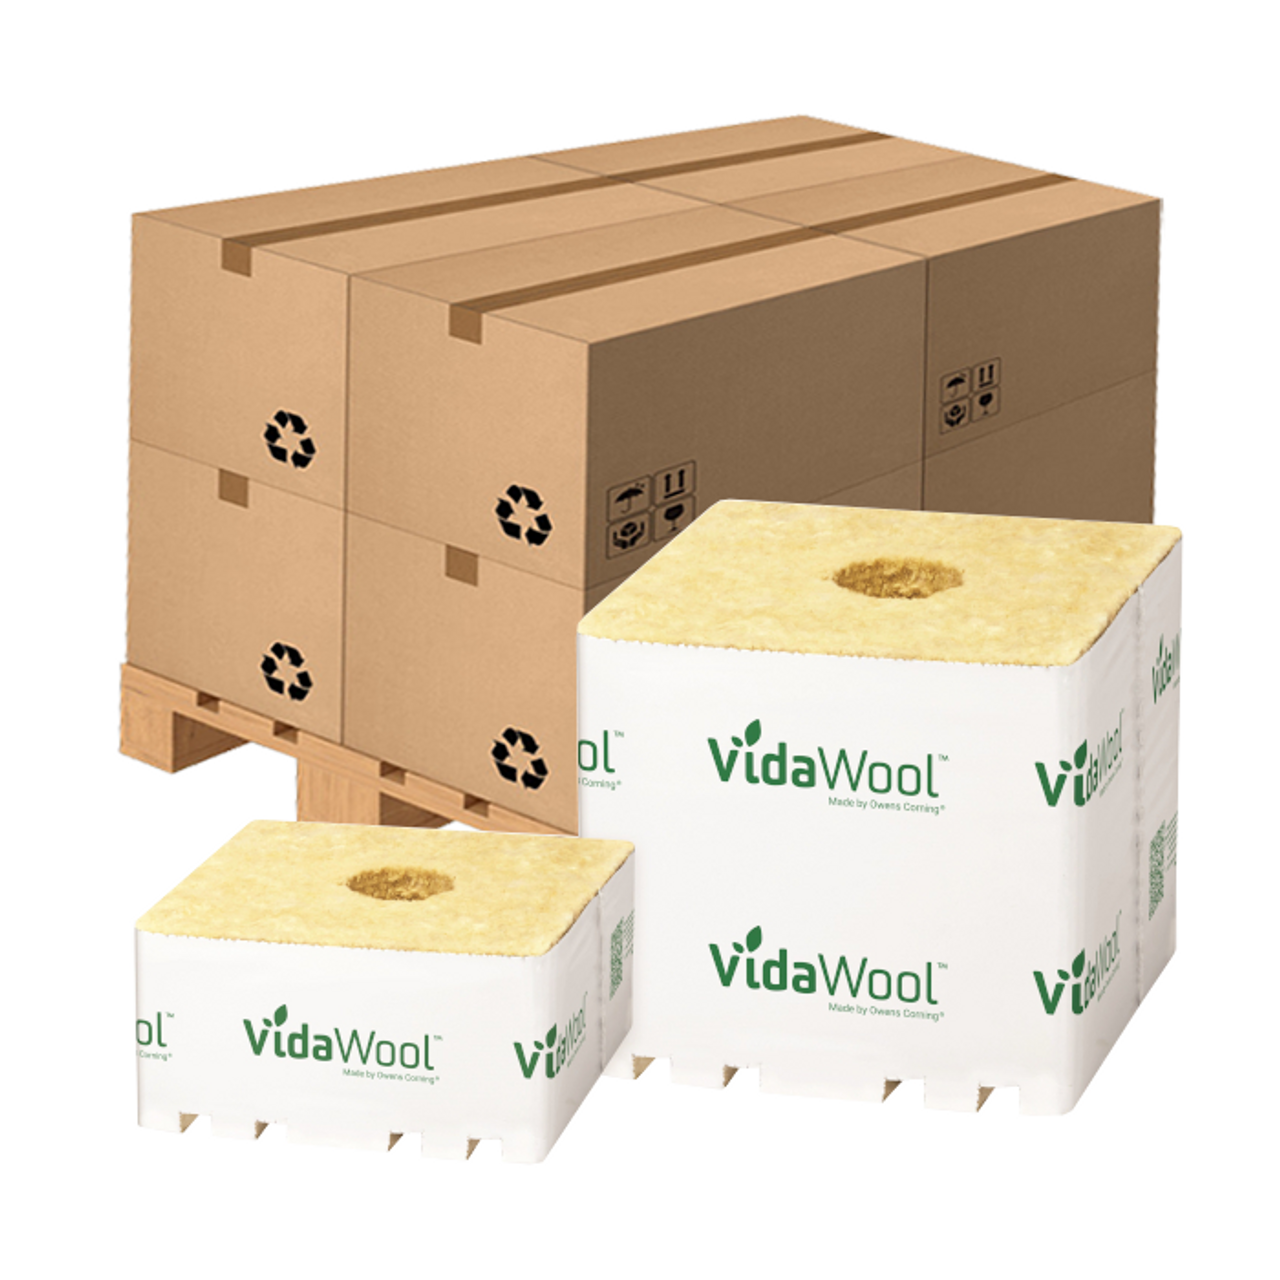 VidaWool Rockwool Block 190 with Hole, 6 Inch x 6 Inch x 5.3 Inch, Case of 48